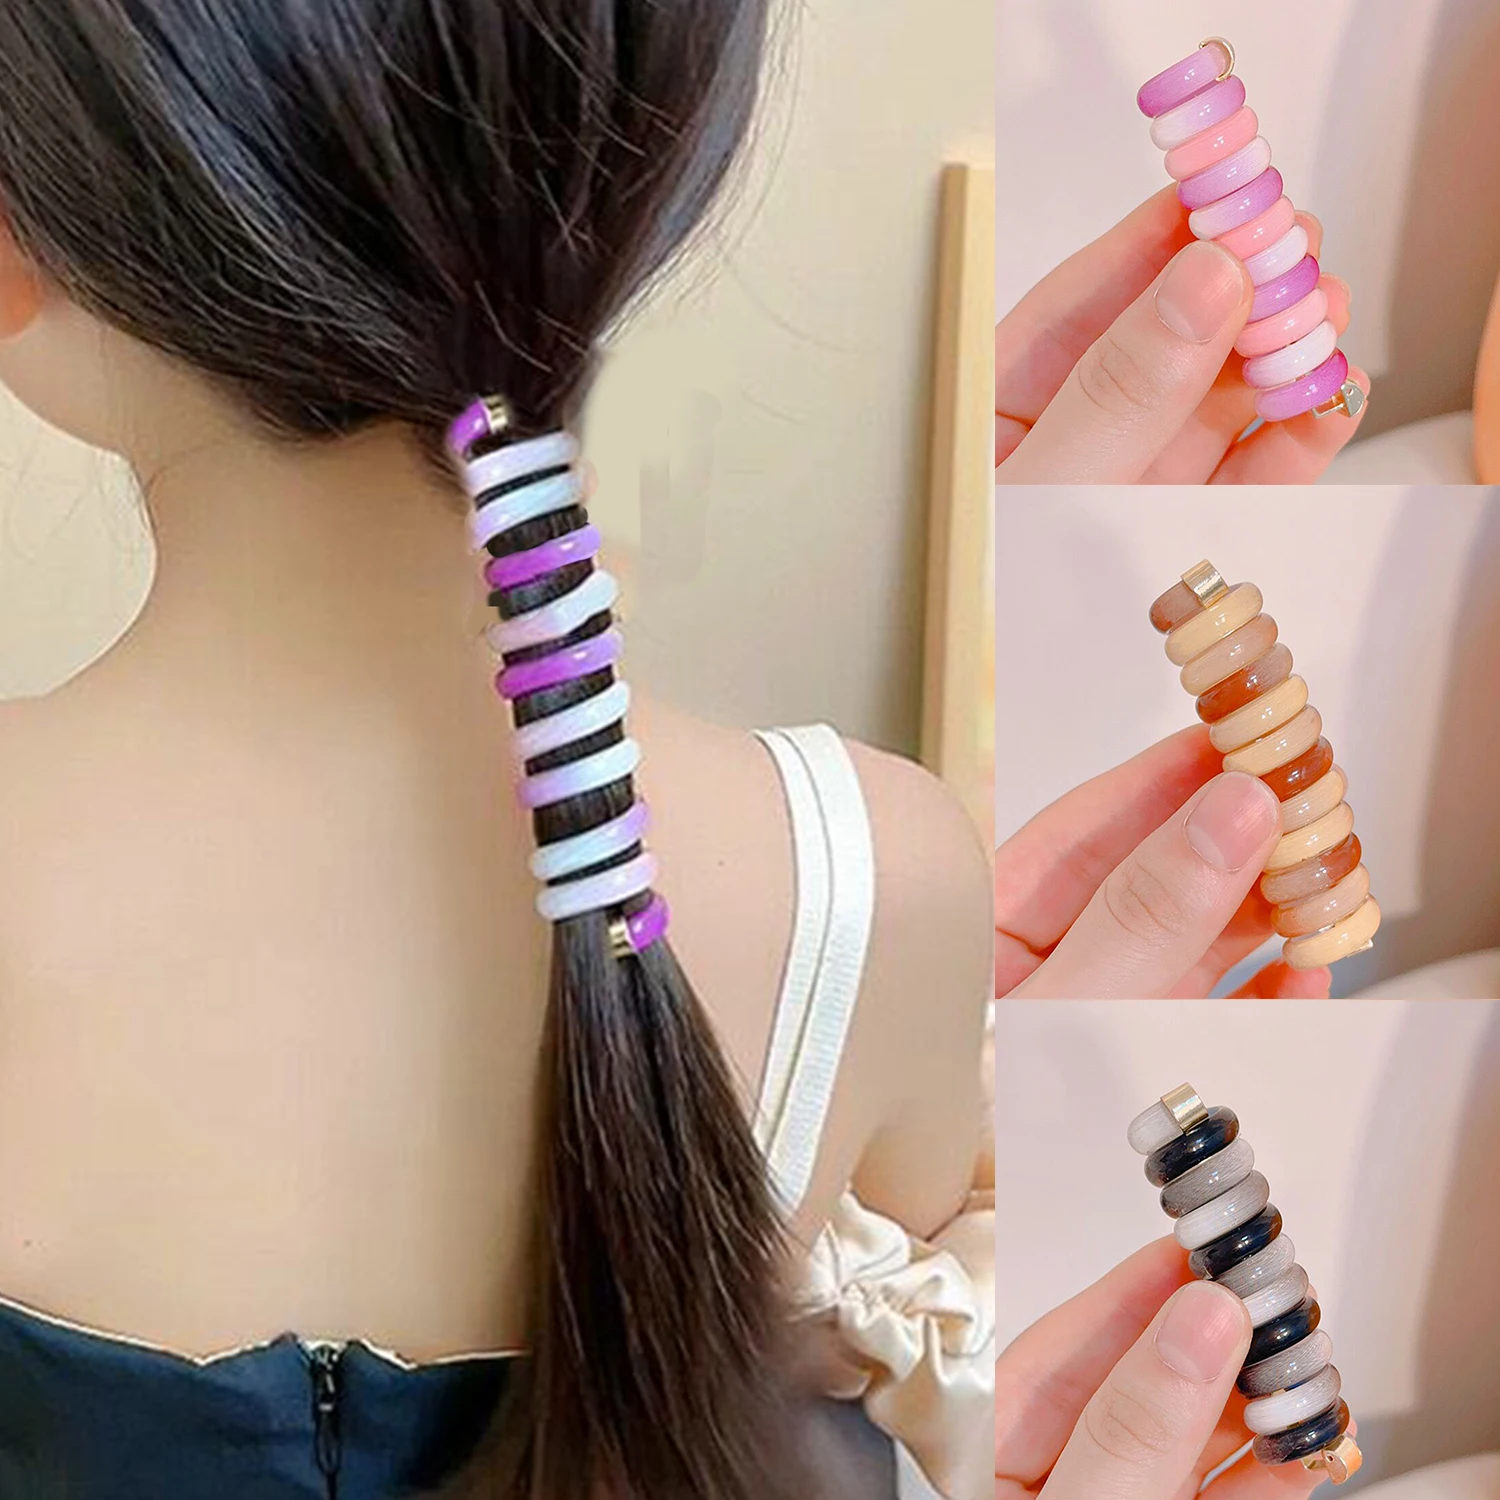 

Children Dopamine Girls Jelly Color Ponytail Elastic Hair Bands Rubber Tie Bundle Scrunchies Telephone Wire Kids Accessories 1pc